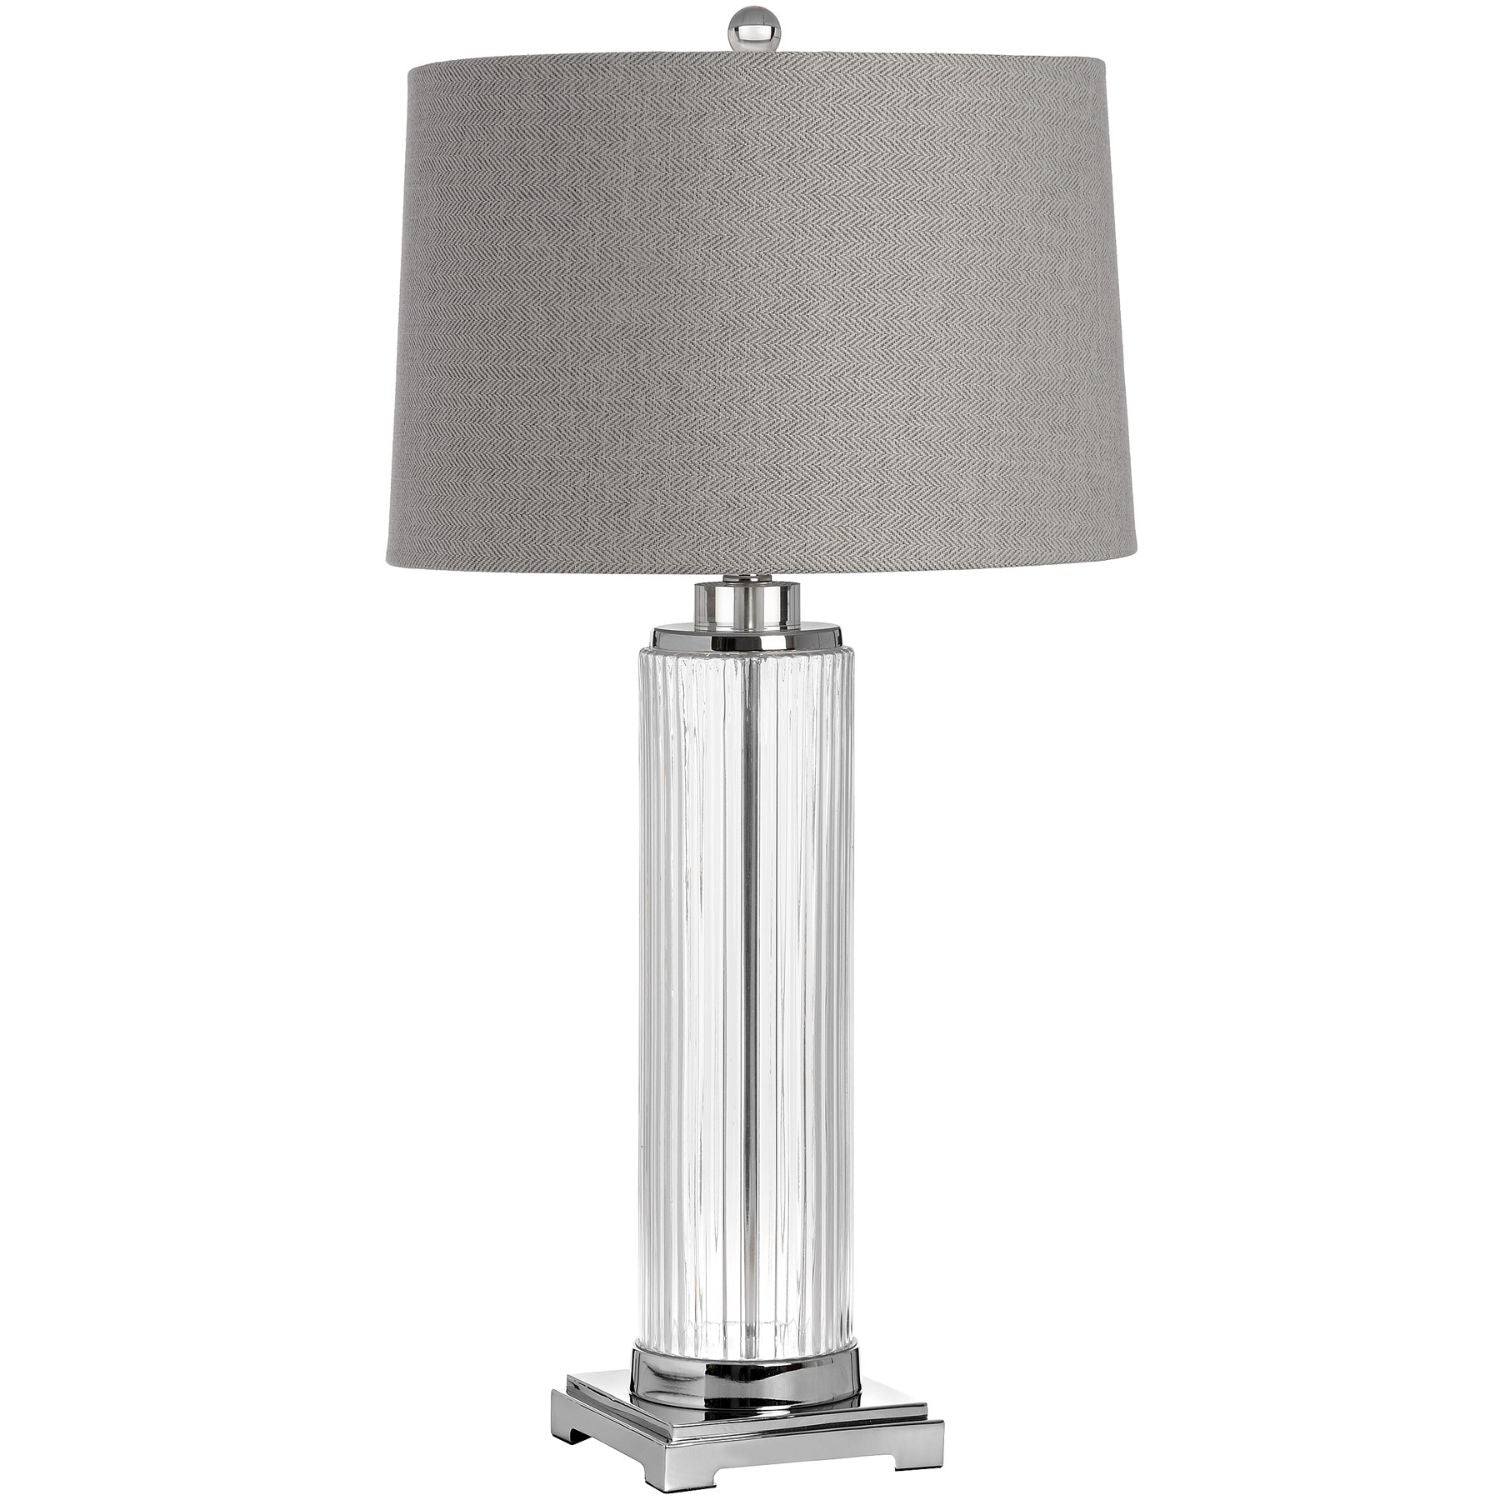 Silver and glass table lamp with grey shade, called Kensington